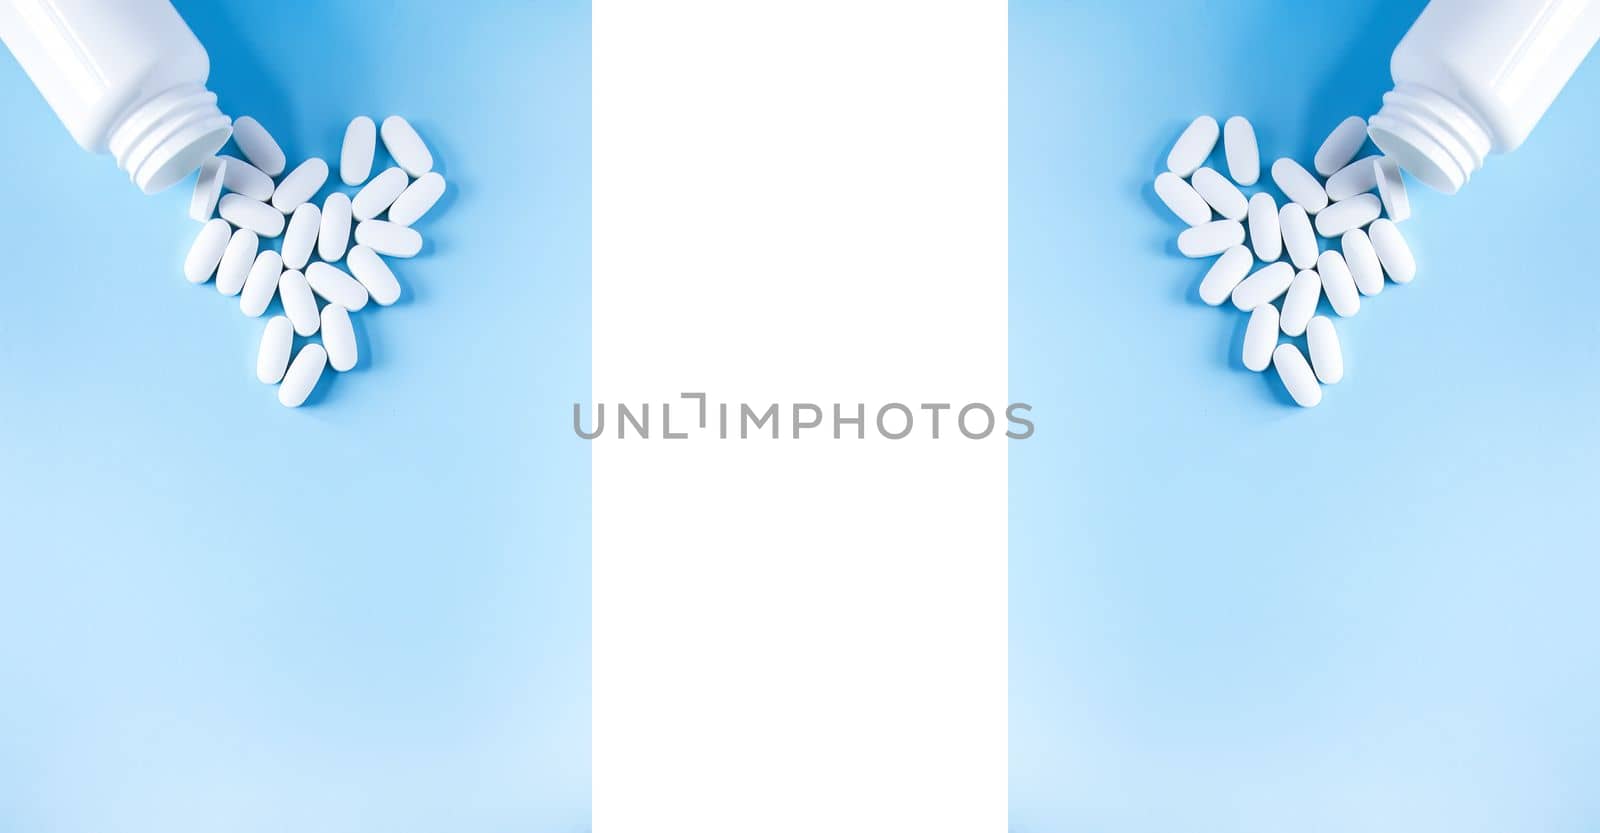 Pills of vitamin in the shape of heart with the opened white plastic container on soft blue background. Symmetrical banner. Medicine theme.